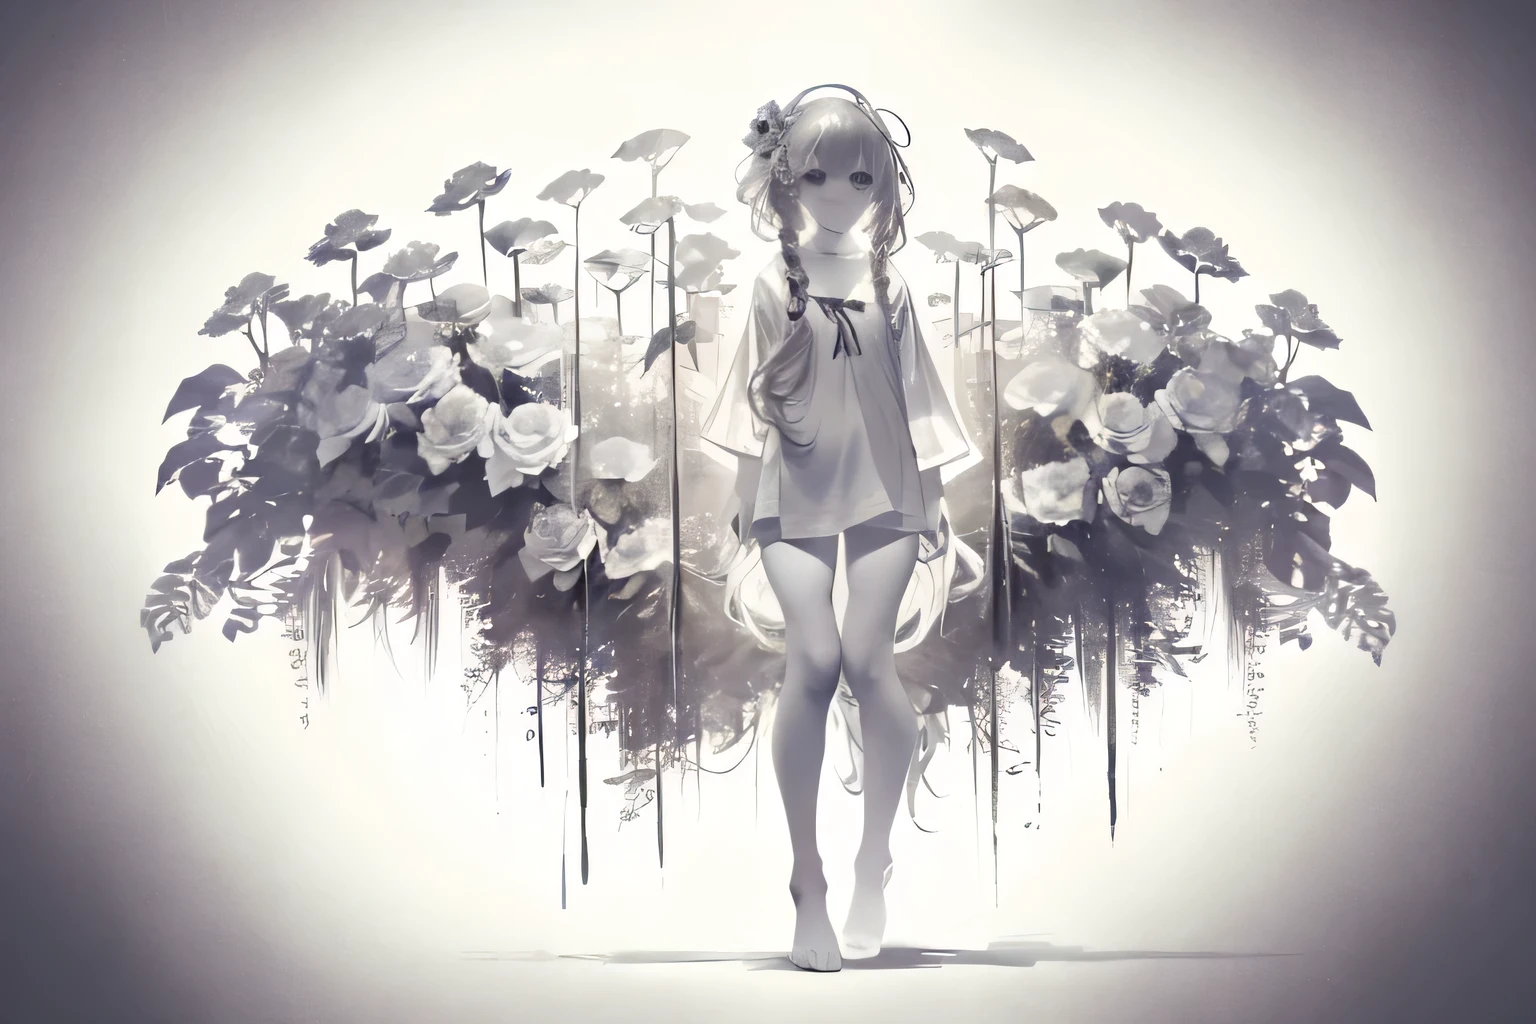 solo,1female\(chibi,cute,kawaii,age of 10,hair color white,braid hair,messy hair,eye color gray,big eyes,white skin,(monochrome:1.2),droop,(full body:1.8),sitting\),background\((many beautiful flowers and petal:1.4),messy tiny room\),double exposure, BREAK ,
quality\(8k,wallpaper of extremely detailed CG unit, ​masterpiece,high resolution,top-quality,top-quality real texture skin,hyper realisitic,increase the resolution,RAW photos,best qualtiy,highly detailed,the wallpaper\),,high contrast,(grayscale:1.4),monochrome